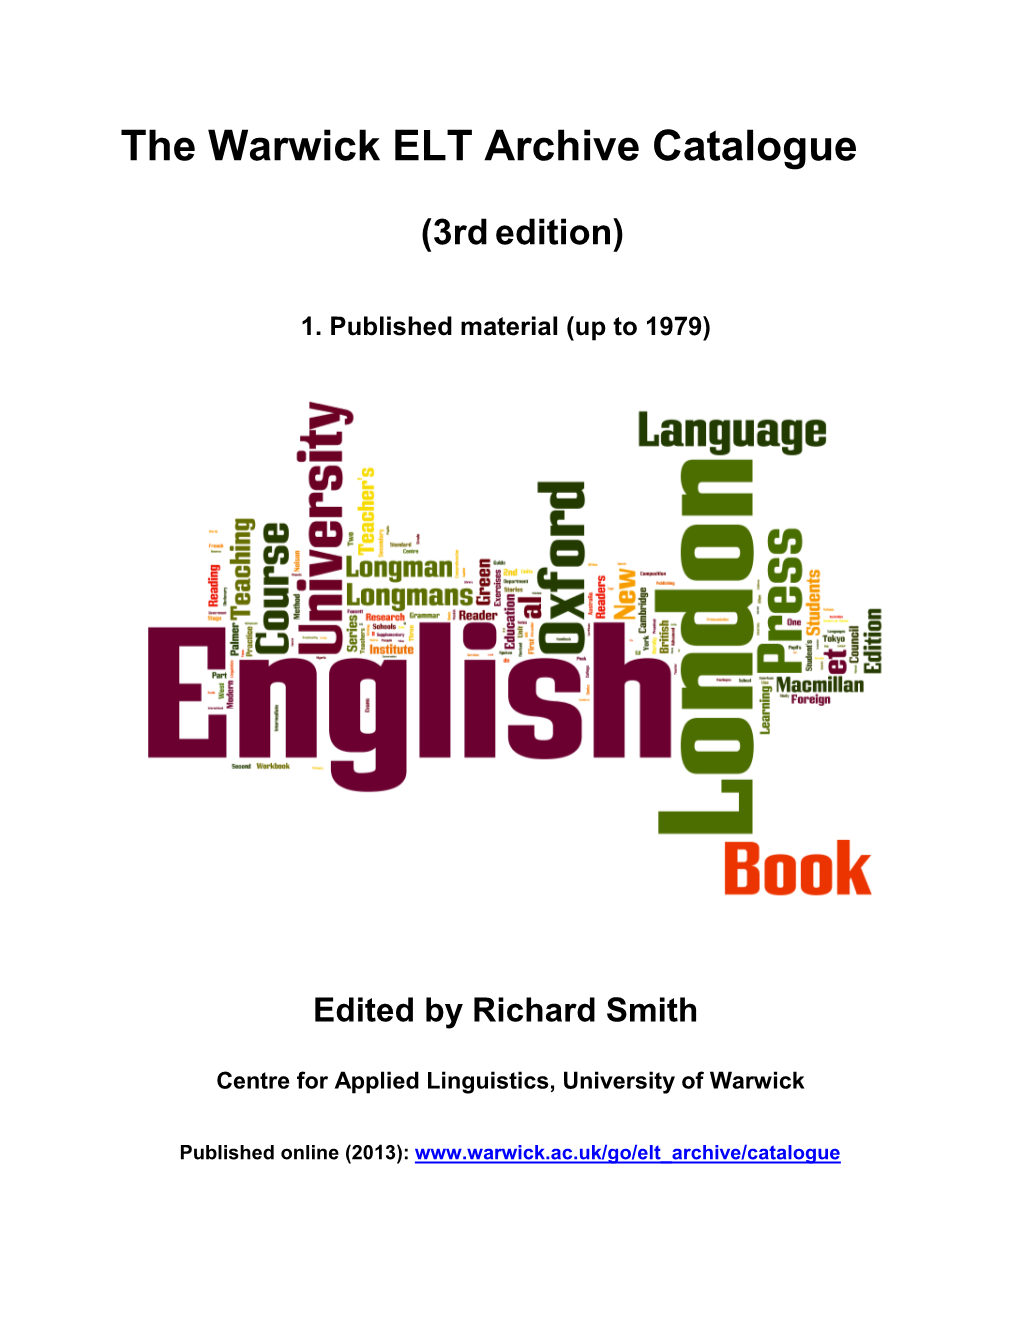 The Warwick ELT Archive Catalogue